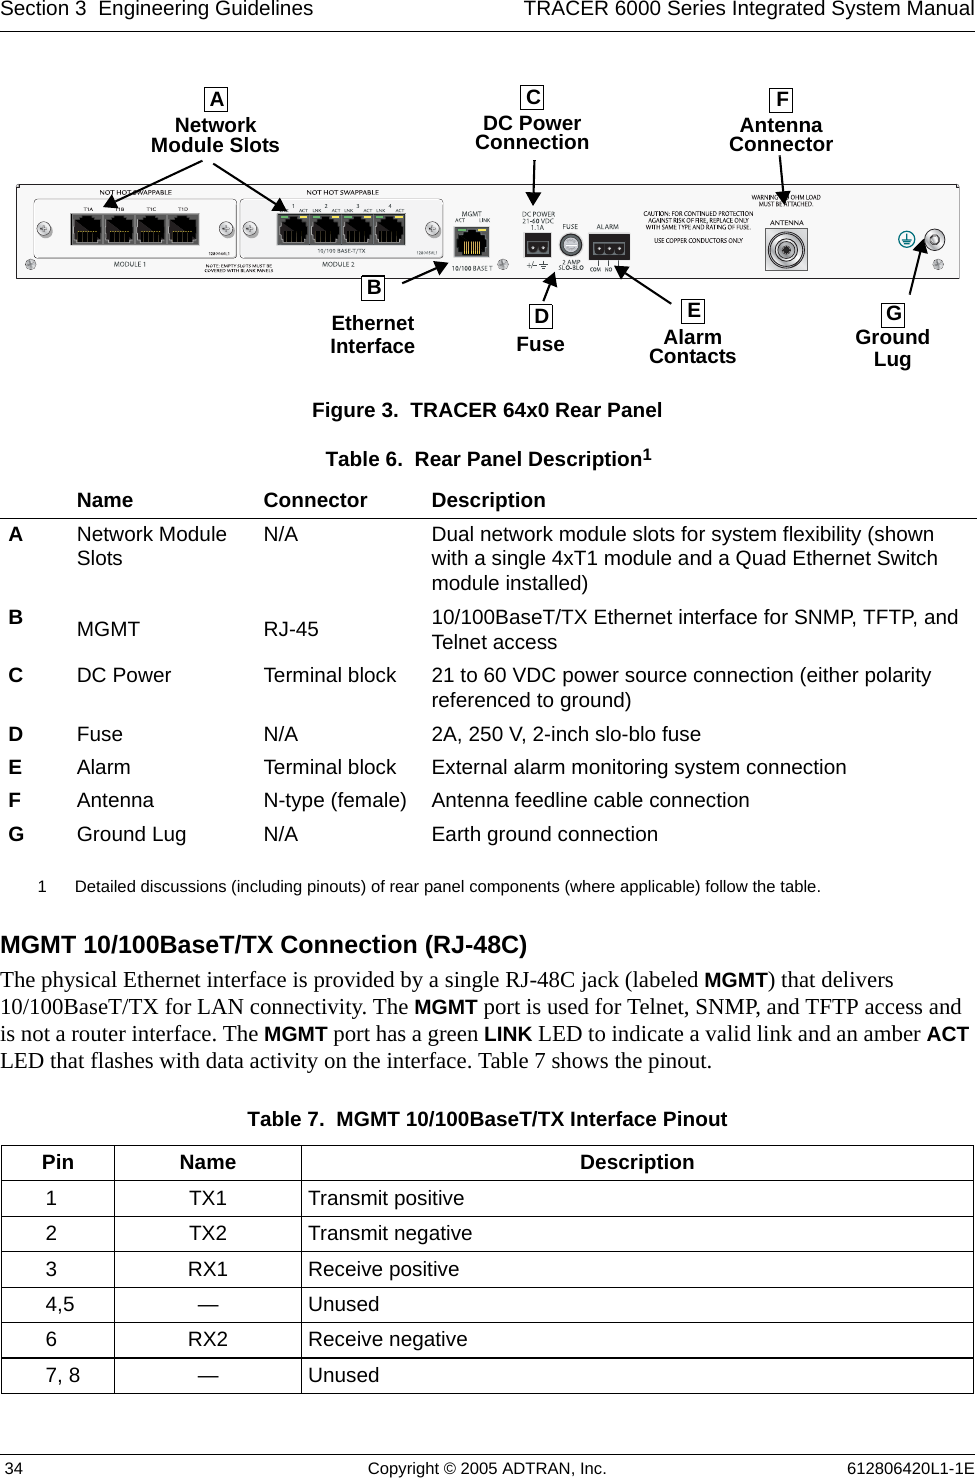 Section 3  Engineering Guidelines TRACER 6000 Series Integrated System Manual 34 Copyright © 2005 ADTRAN, Inc. 612806420L1-1EFigure 3.  TRACER 64x0 Rear PanelMGMT 10/100BaseT/TX Connection (RJ-48C)The physical Ethernet interface is provided by a single RJ-48C jack (labeled MGMT) that delivers 10/100BaseT/TX for LAN connectivity. The MGMT port is used for Telnet, SNMP, and TFTP access and is not a router interface. The MGMT port has a green LINK LED to indicate a valid link and an amber ACT LED that flashes with data activity on the interface. Table 7 shows the pinout.Table 6.  Rear Panel Description11 Detailed discussions (including pinouts) of rear panel components (where applicable) follow the table.Name Connector DescriptionANetwork Module Slots N/A Dual network module slots for system flexibility (shown with a single 4xT1 module and a Quad Ethernet Switch module installed)BMGMT RJ-45 10/100BaseT/TX Ethernet interface for SNMP, TFTP, and Telnet accessCDC Power Terminal block 21 to 60 VDC power source connection (either polarity referenced to ground)DFuse N/A 2A, 250 V, 2-inch slo-blo fuseEAlarm Terminal block External alarm monitoring system connectionFAntenna N-type (female) Antenna feedline cable connectionGGround Lug N/A Earth ground connectionTable 7.  MGMT 10/100BaseT/TX Interface Pinout Pin Name Description1TX1 Transmit positive2TX2 Transmit negative3RX1 Receive positive4,5 —Unused6RX2 Receive negative7, 8 —UnusedAntennaDC PowerConnection ConnectorGroundLugFuse AlarmContactsCFBEDGEthernetInterfaceNetworkModule SlotsA